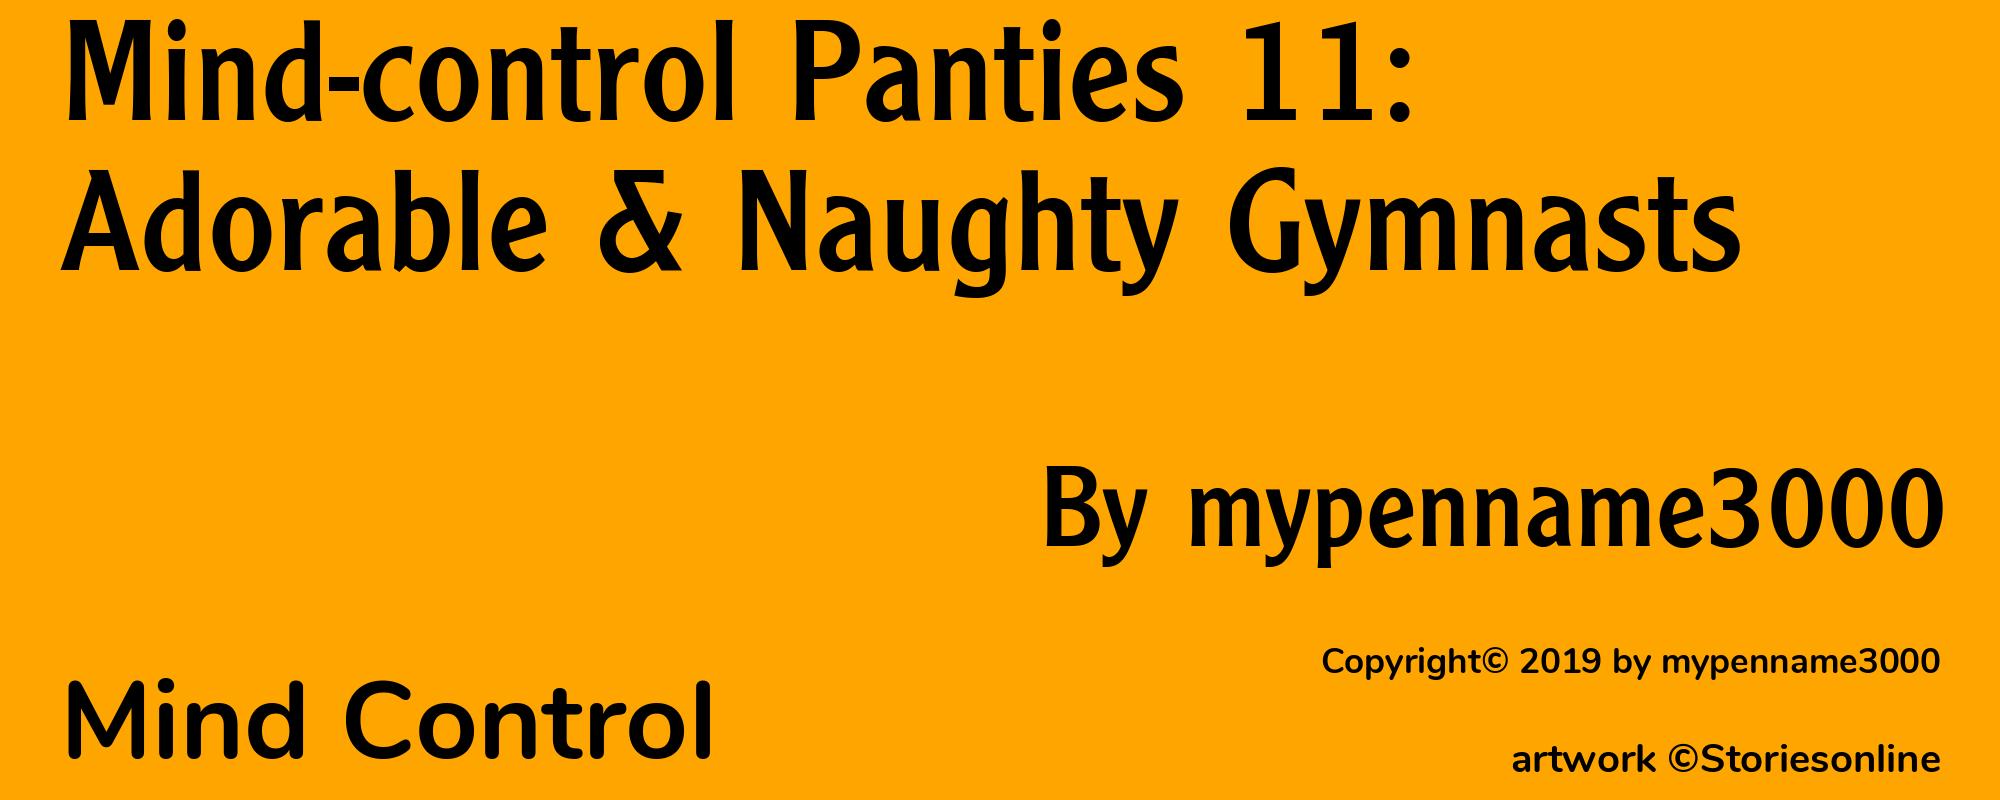 Mind-control Panties 11: Adorable & Naughty Gymnasts - Cover